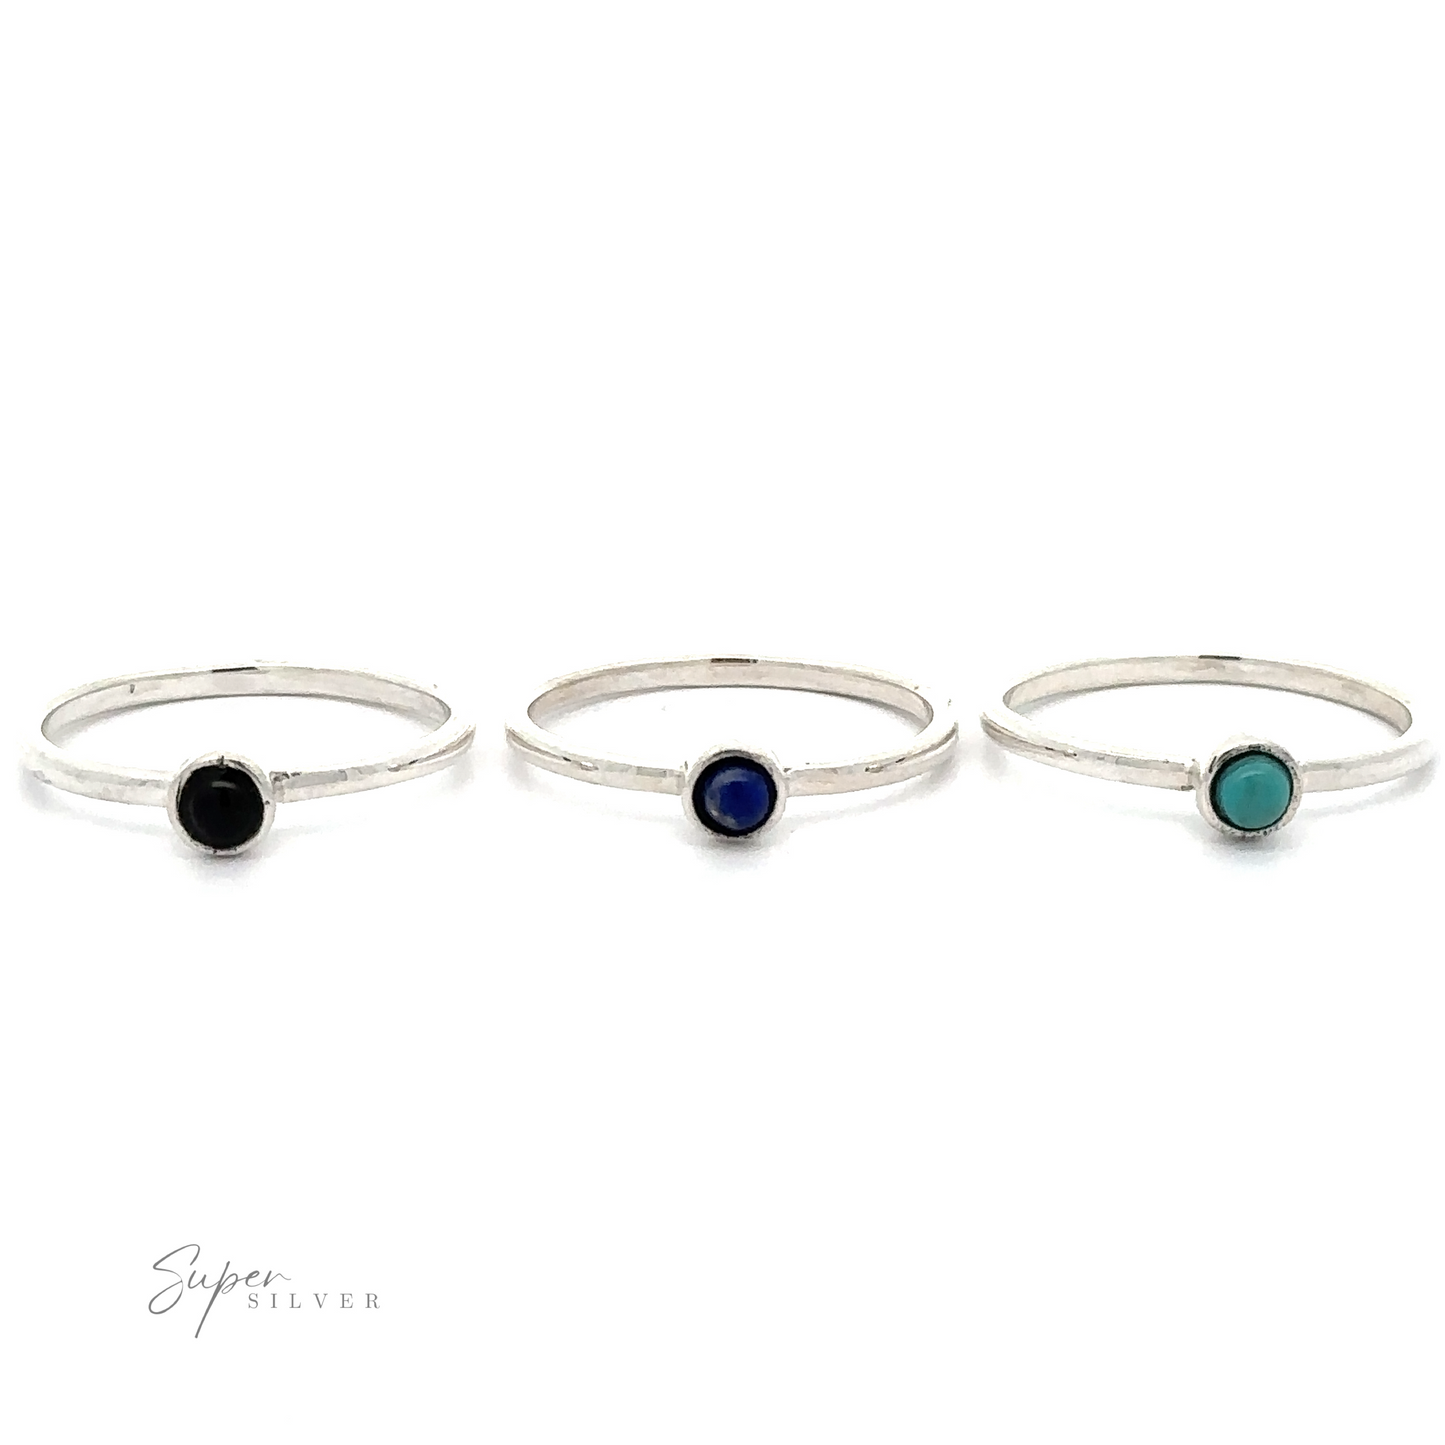 
                  
                    Three sterling silver rings with small round stones; from left to right: black, dark blue, and turquoise stones. Perfect for minimalist fashion enthusiasts, these Dainty Stackable Round Gemstone Rings are branded "Super Silver," displayed in the bottom-left corner.
                  
                